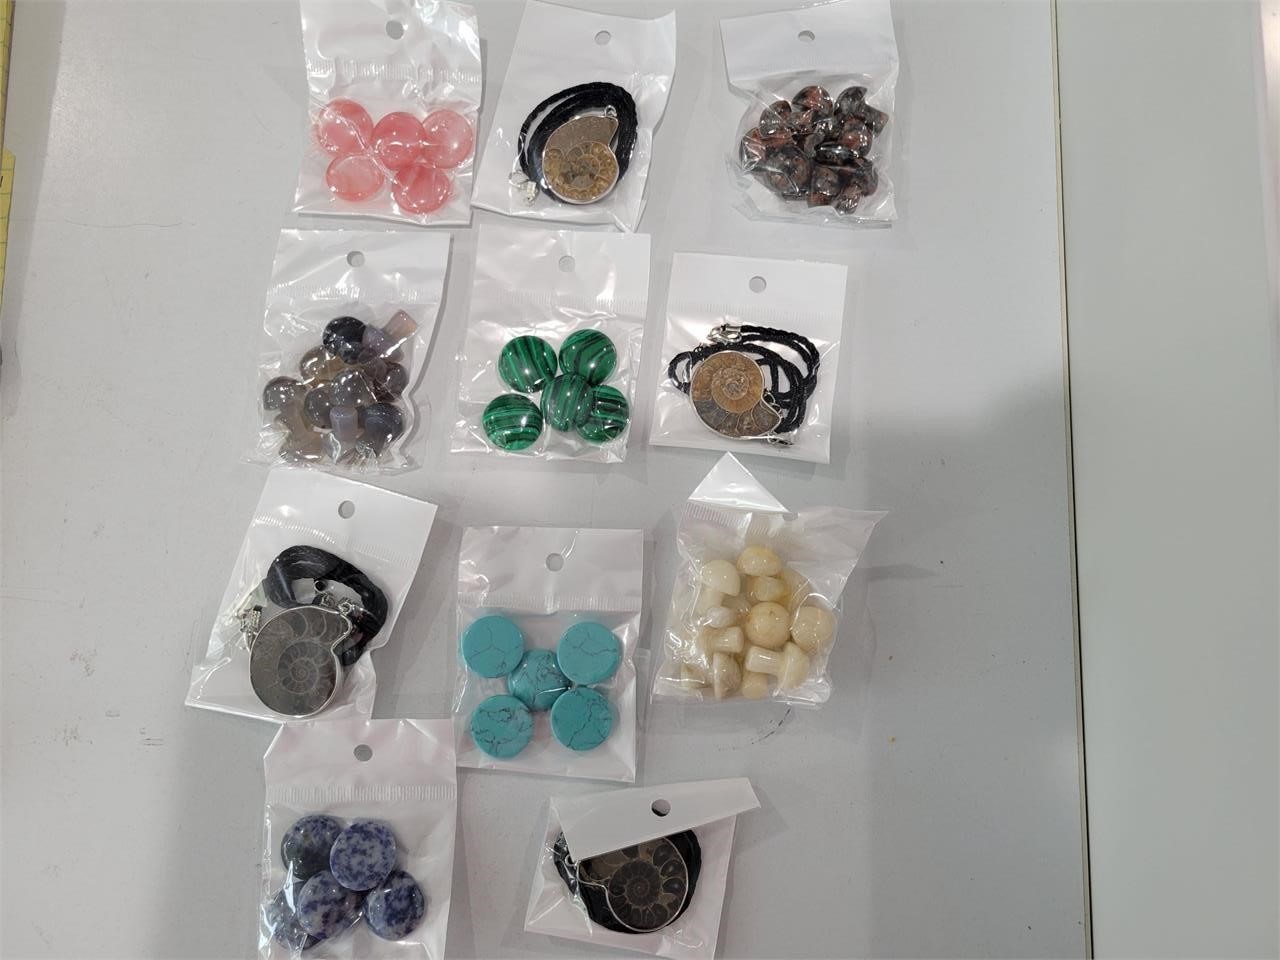 Polished stones and jewelry